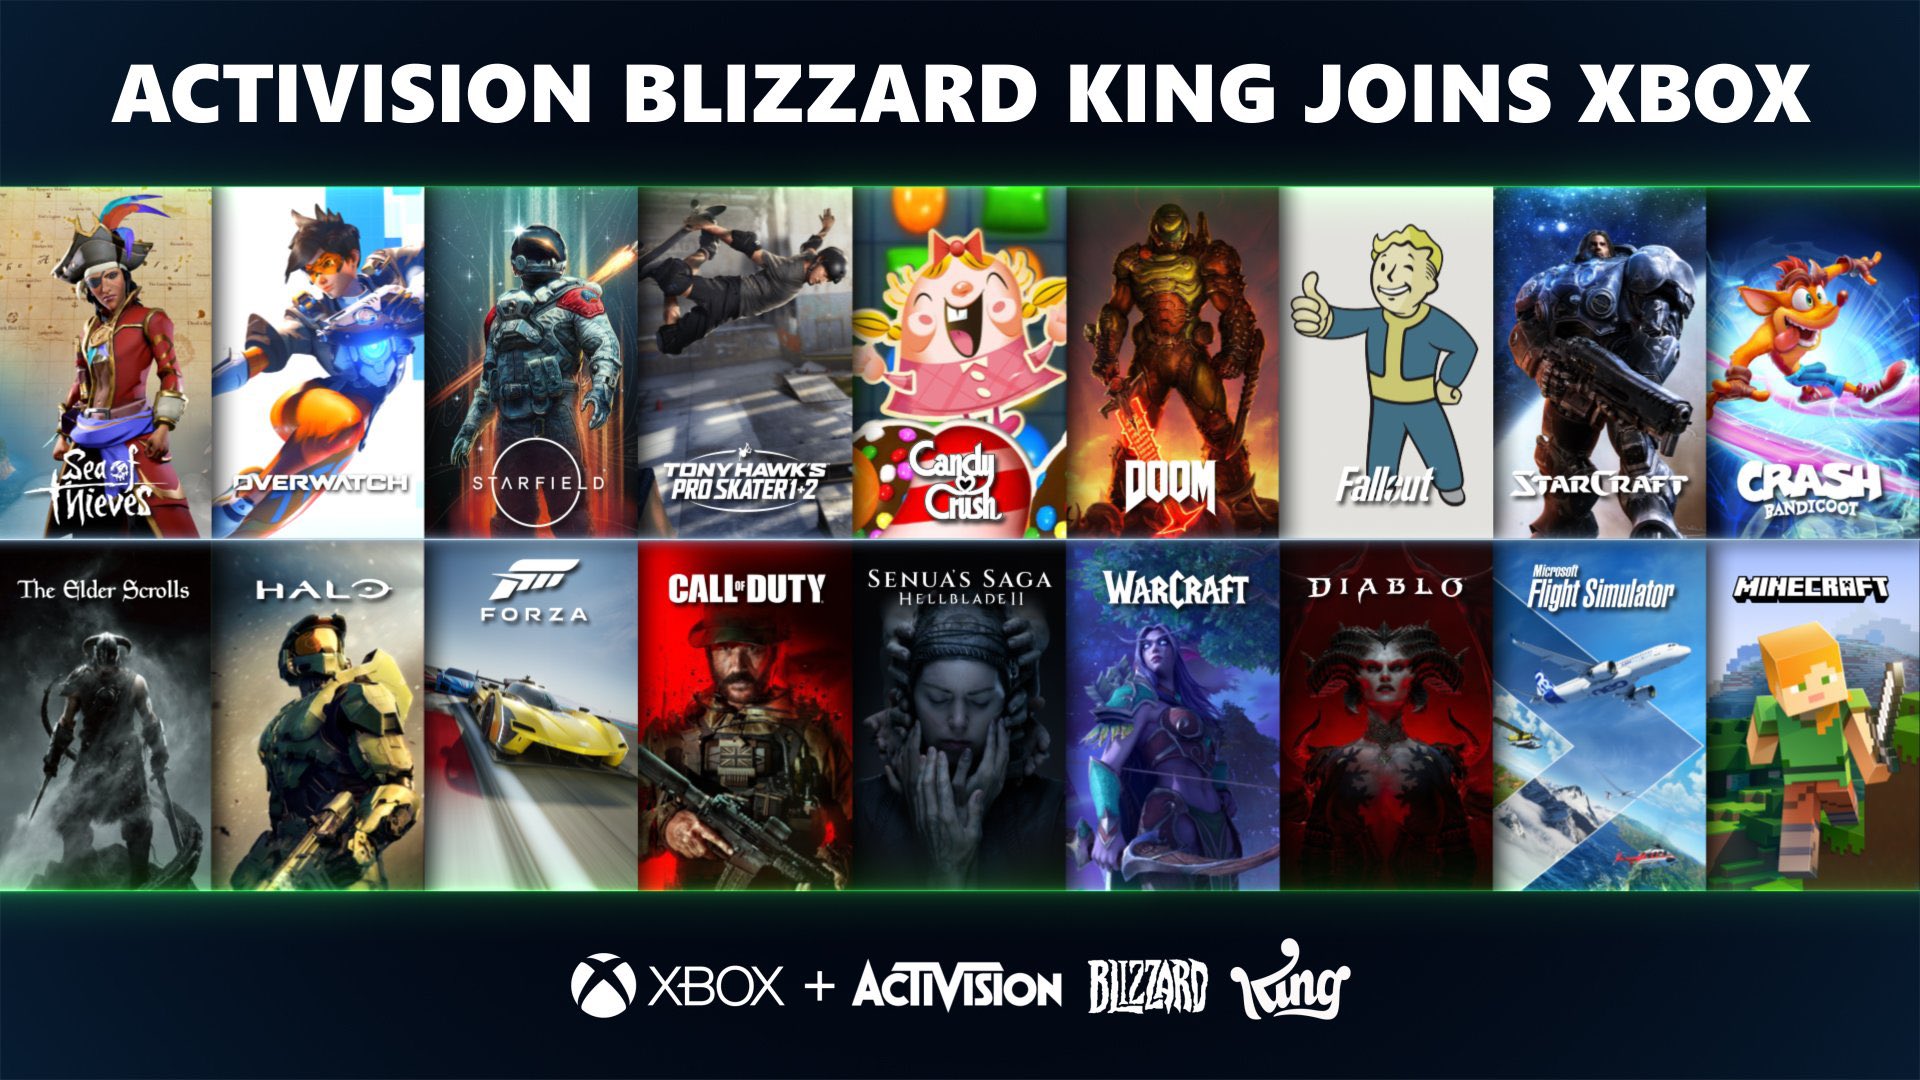 Microsoft Initiates Layoffs, Cuts 1,900 Jobs at Activision Blizzard and